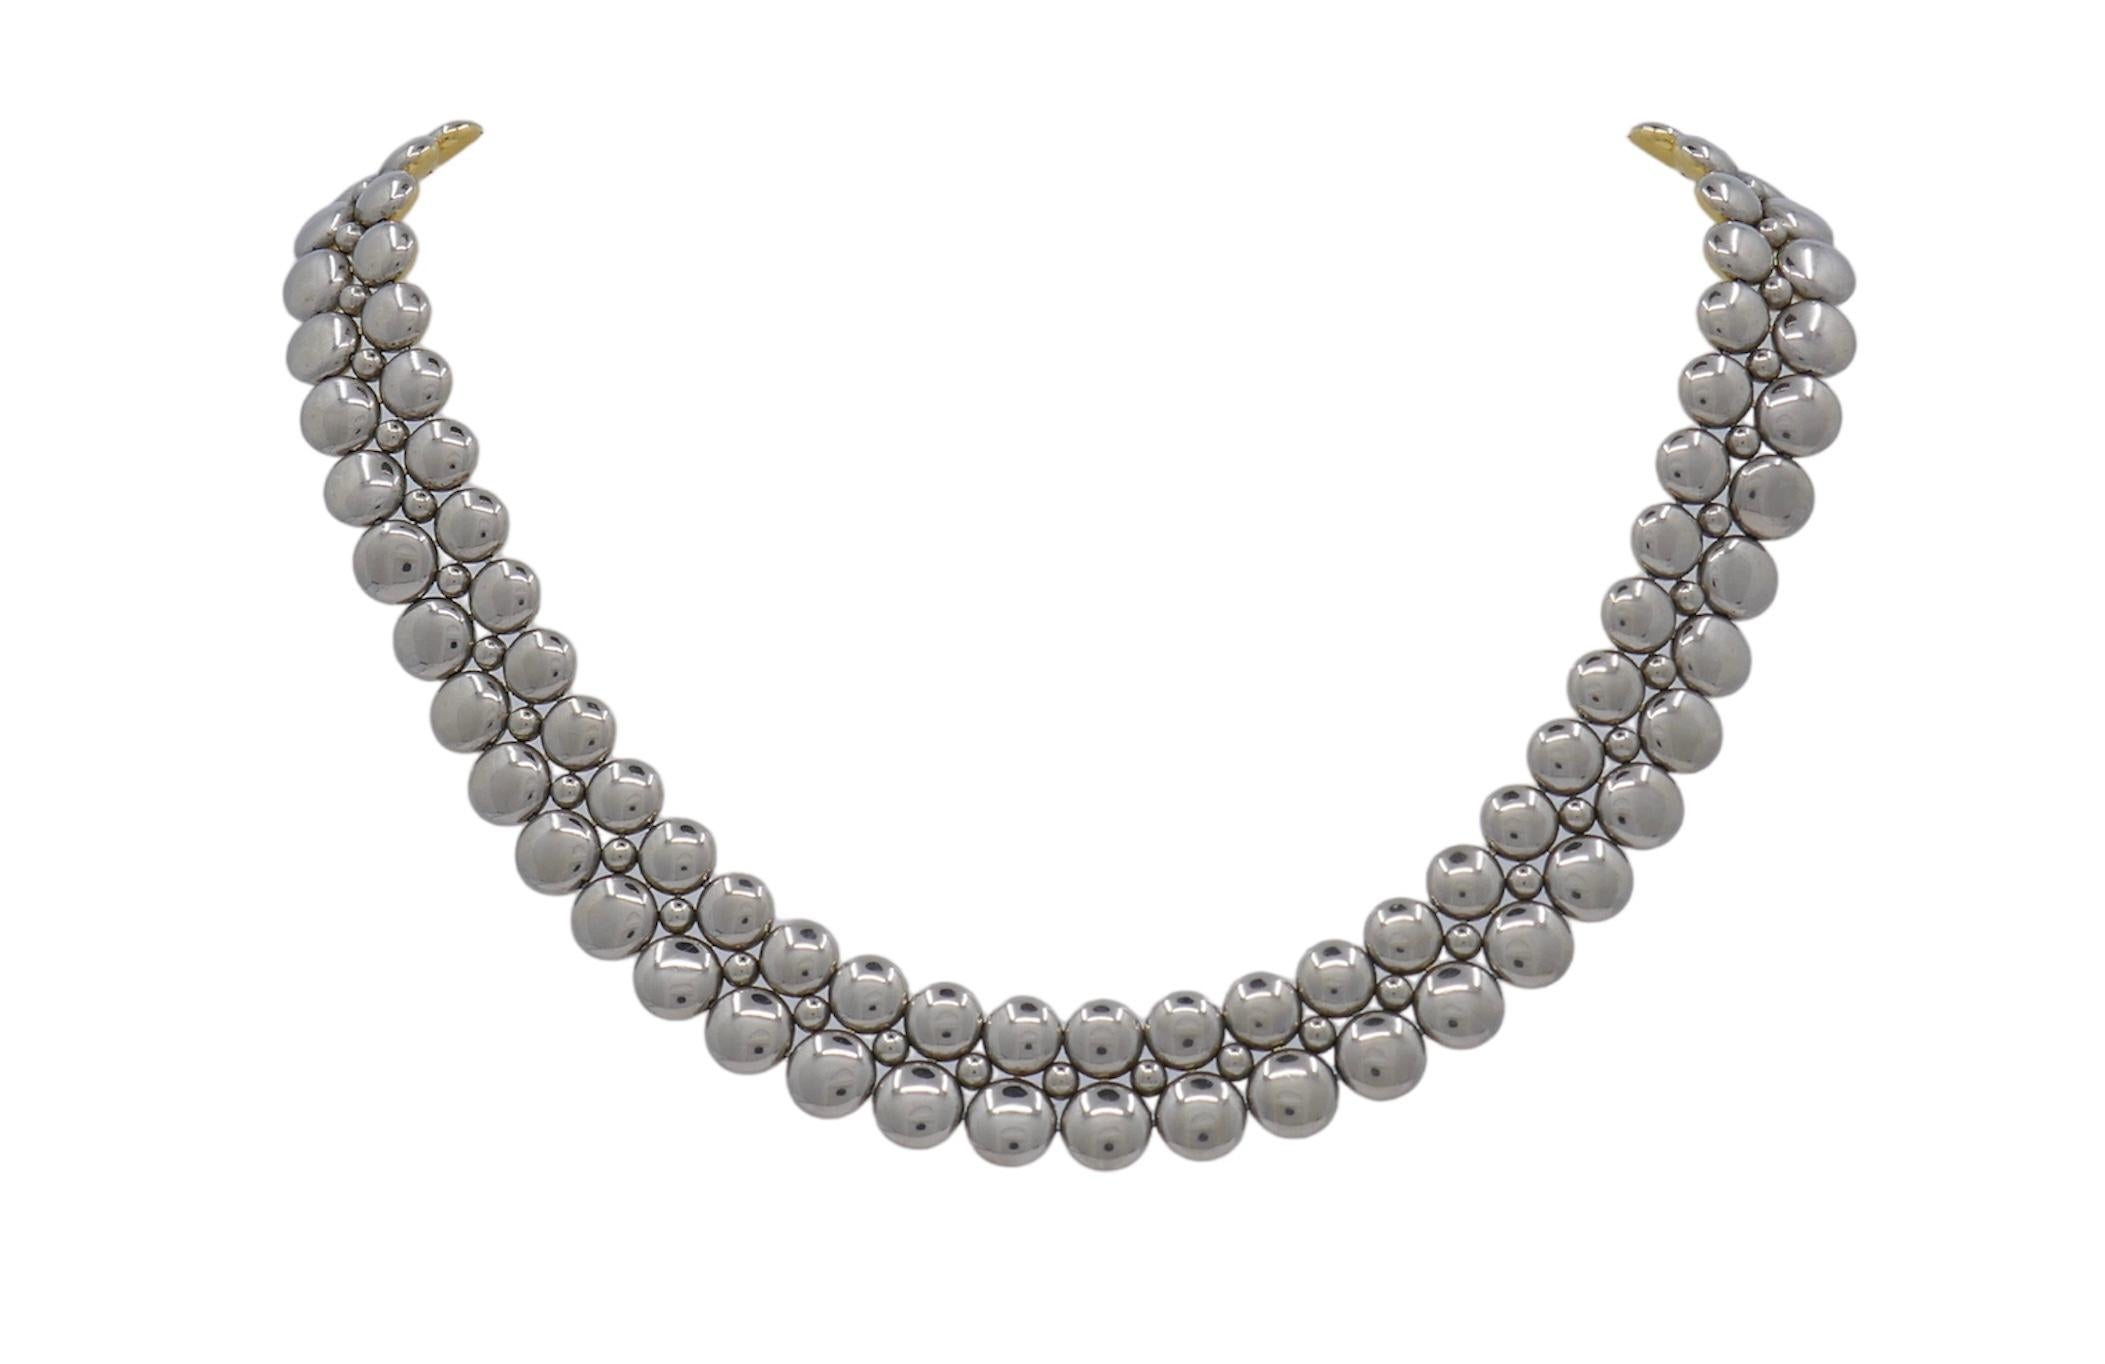 Fabulous design from famed jewelry house Cartier. This necklace is from the Honeymoon collection and crafted in solid 18k gold. The necklace is a unique design as it is  reversible.  One side crafted in yellow gold and the other crafted in white